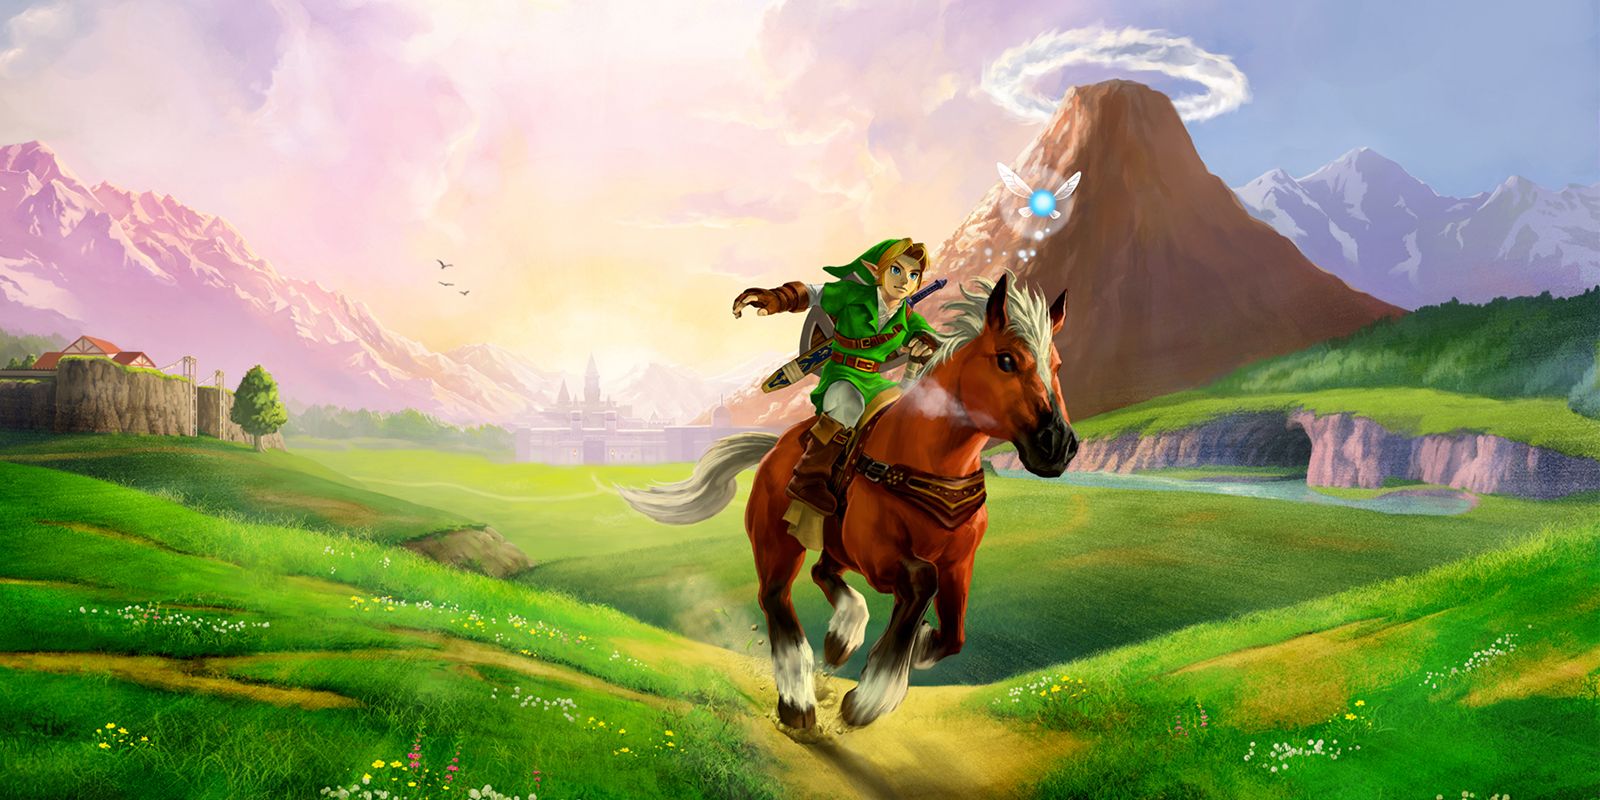 Ocarina of Time 3D poster banner of Link riding Epona